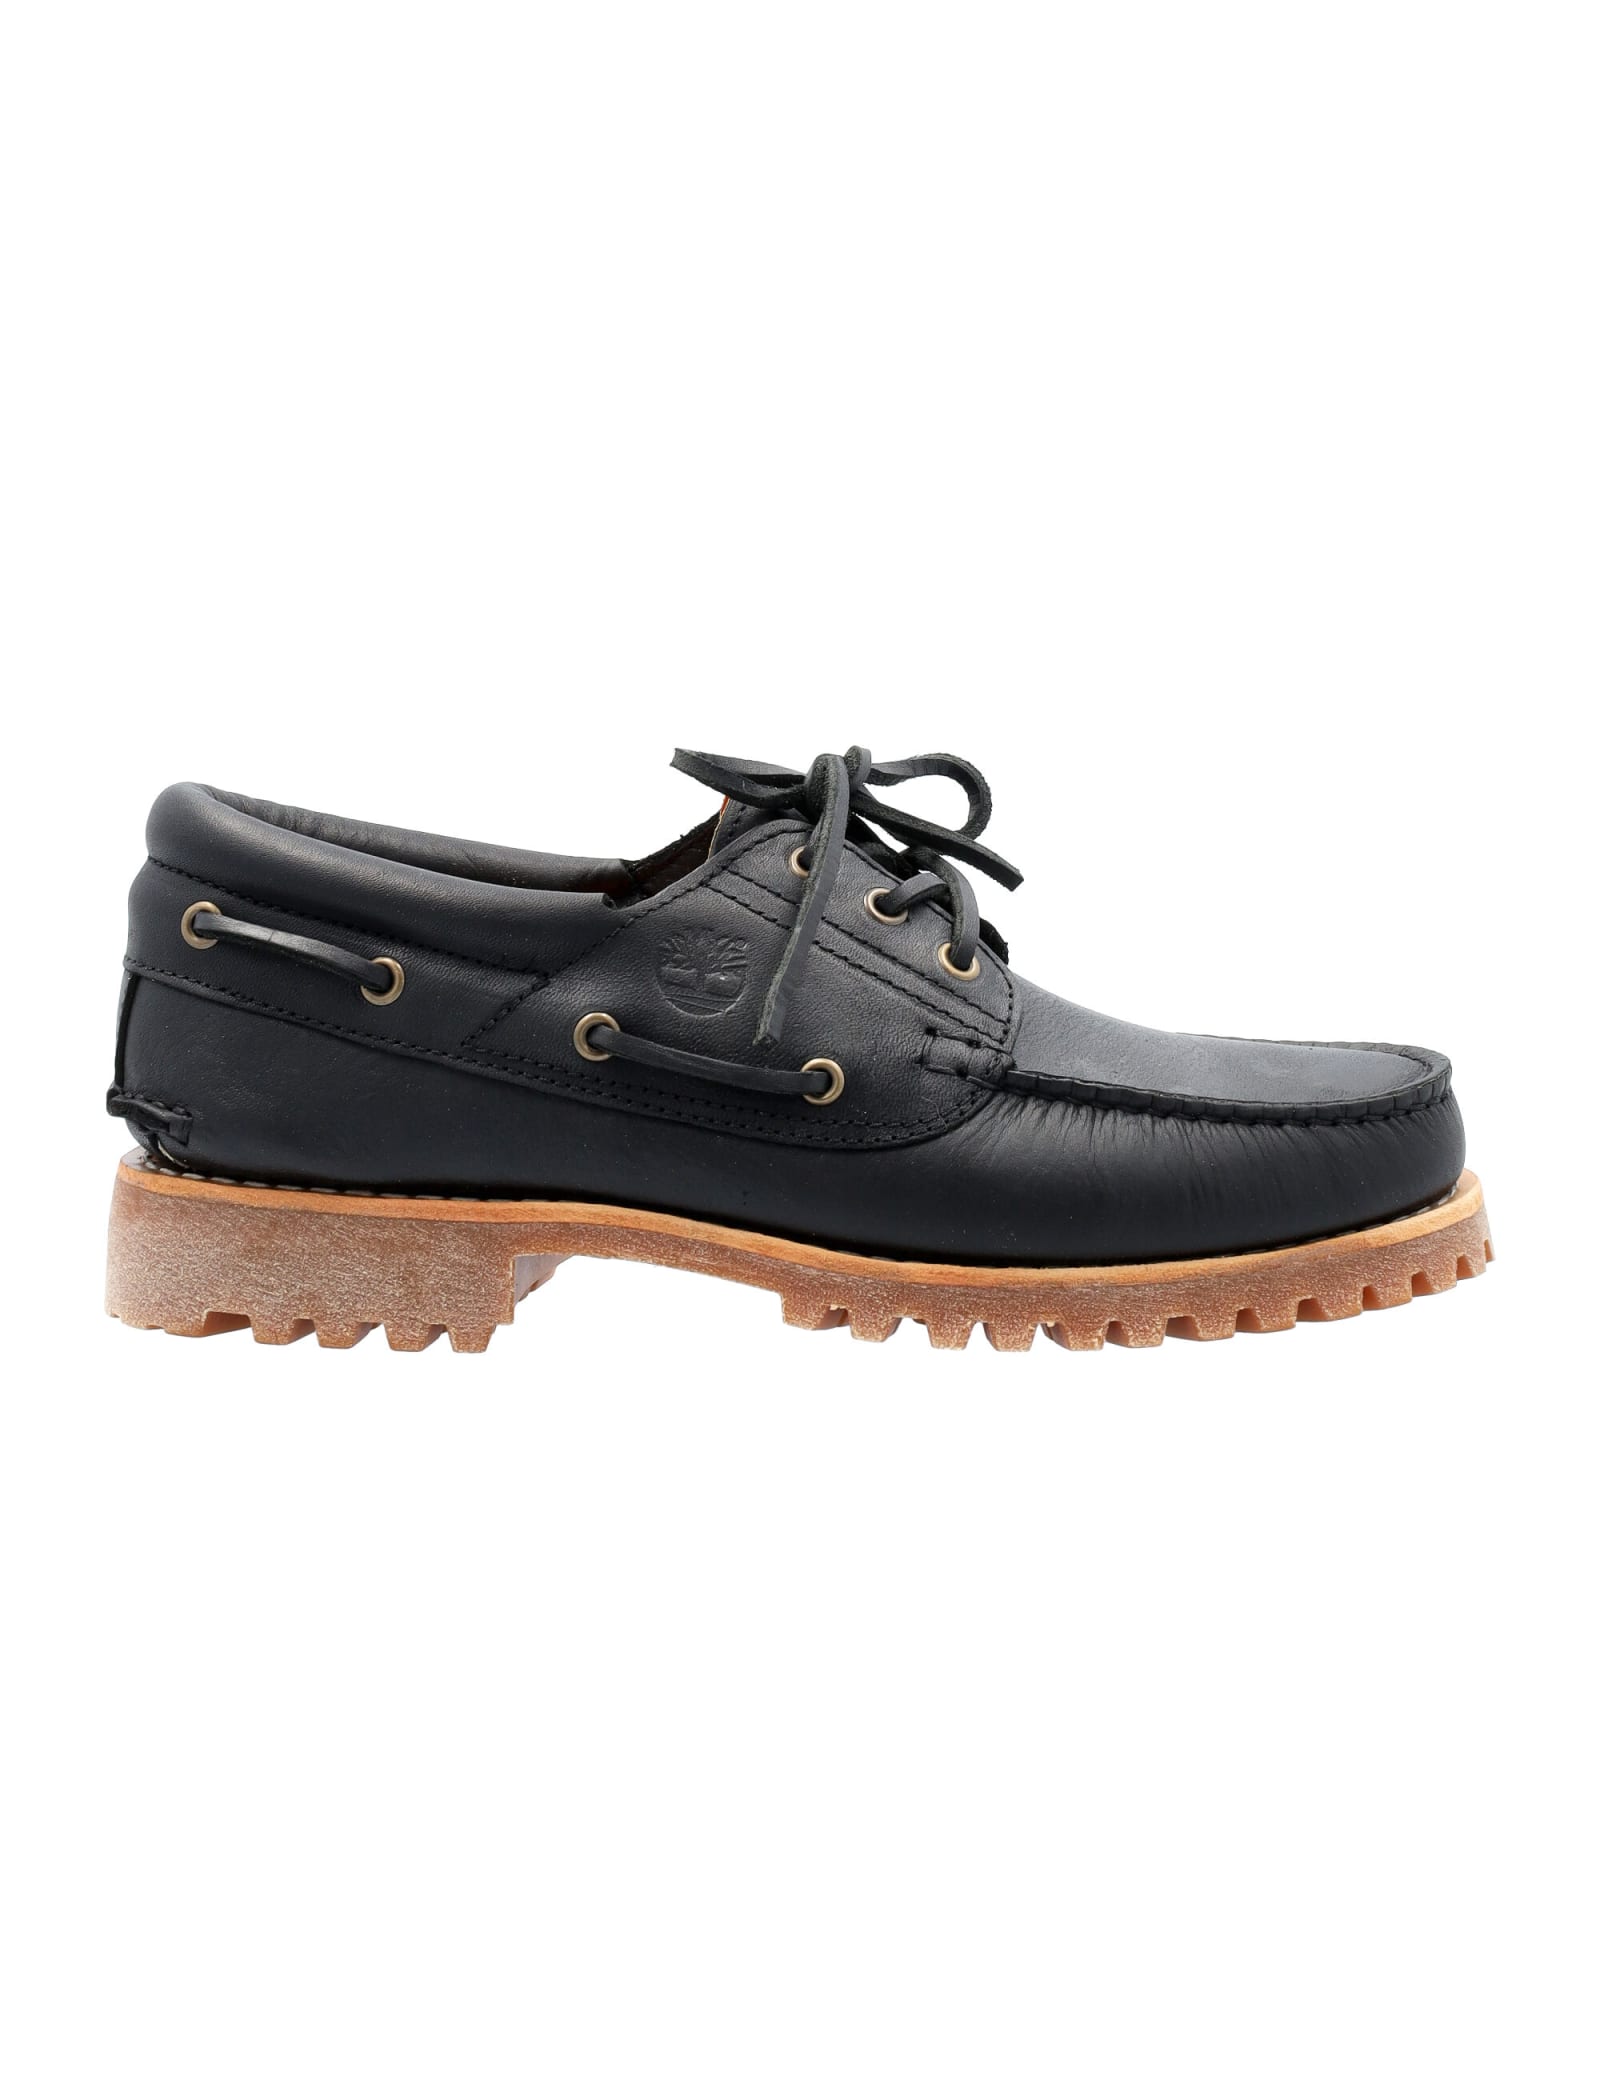 Timberland Authentic Handsewn Boat Shoe